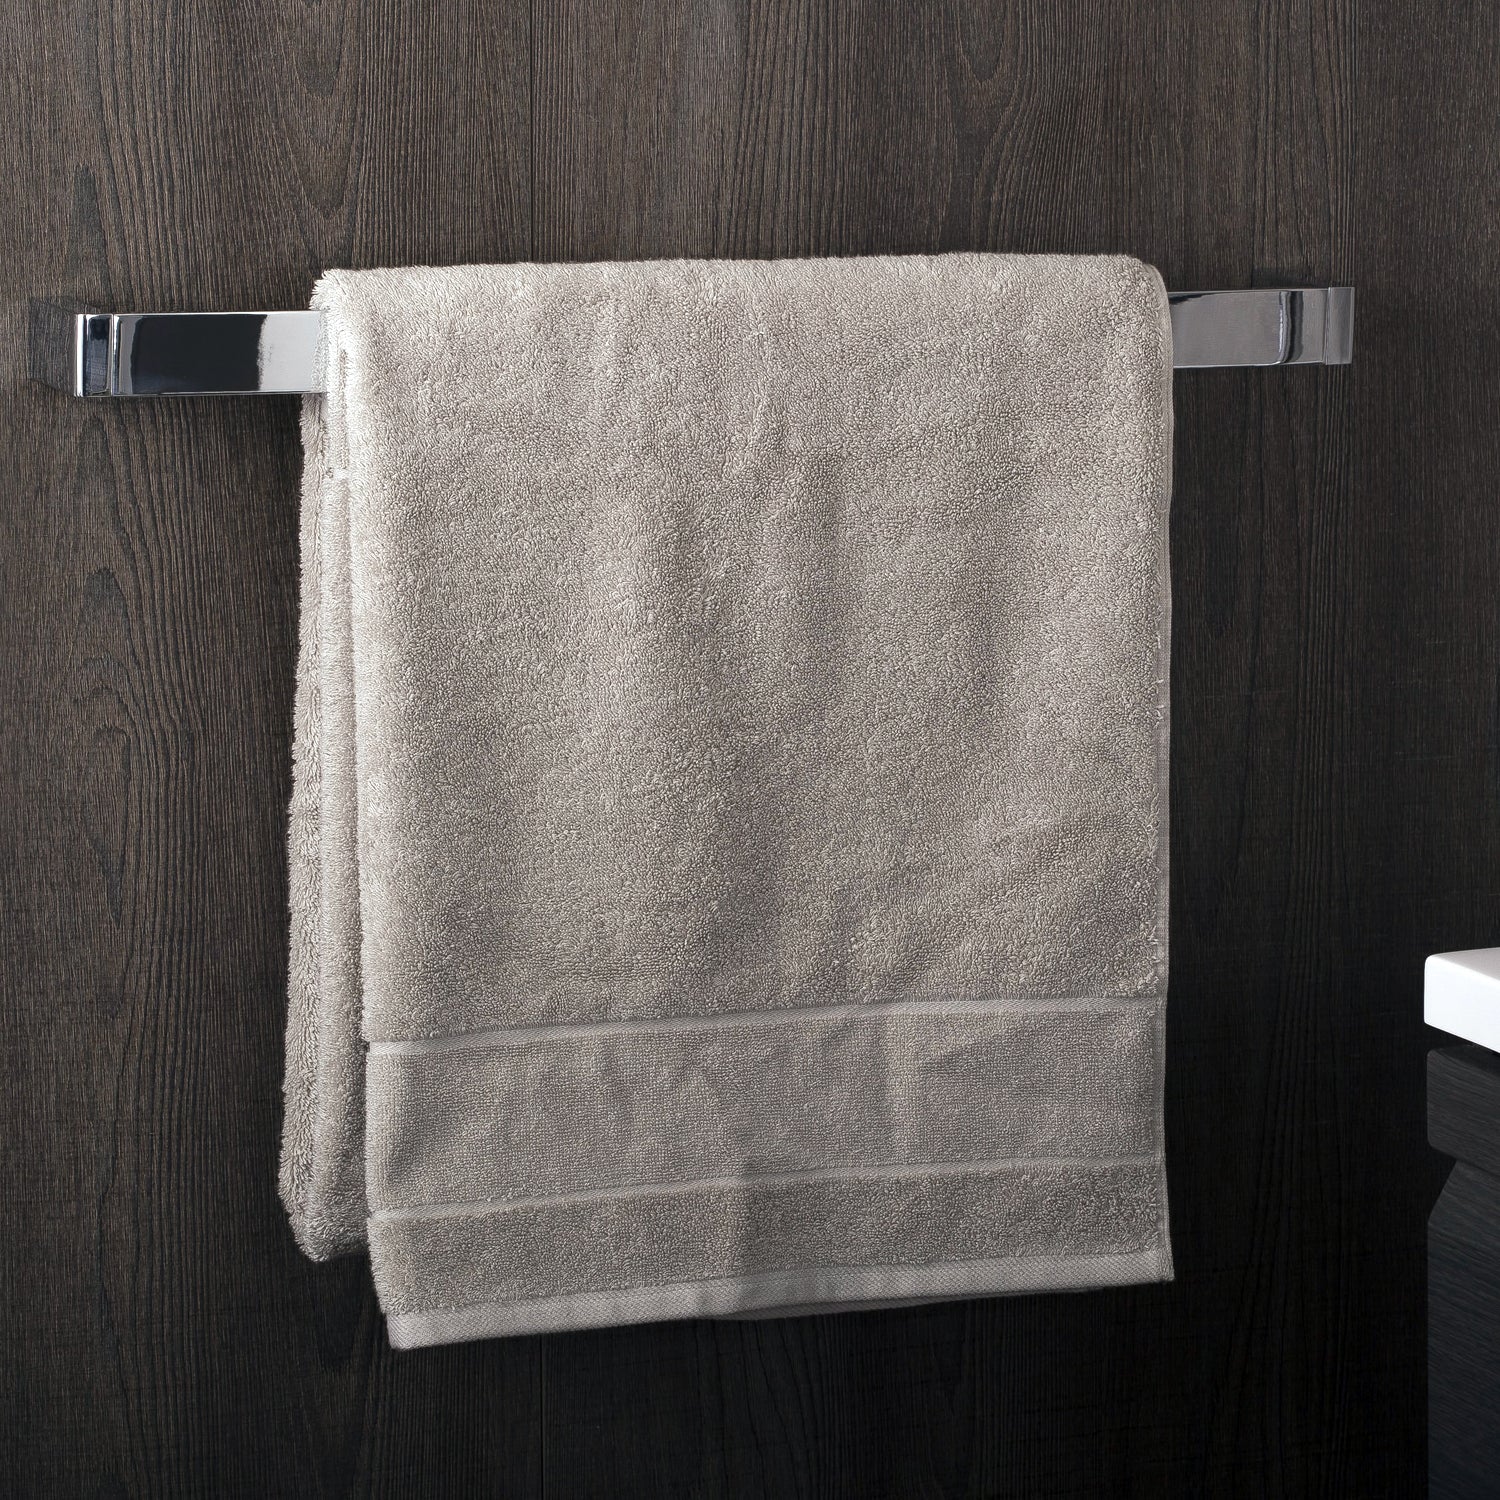 COSMIC Extreme Single Towel Bar, Wall Mount, Brass Body, Chrome Finish, 23-11/16 x 1-3/8 x 2-3/4 Inches (2530165)